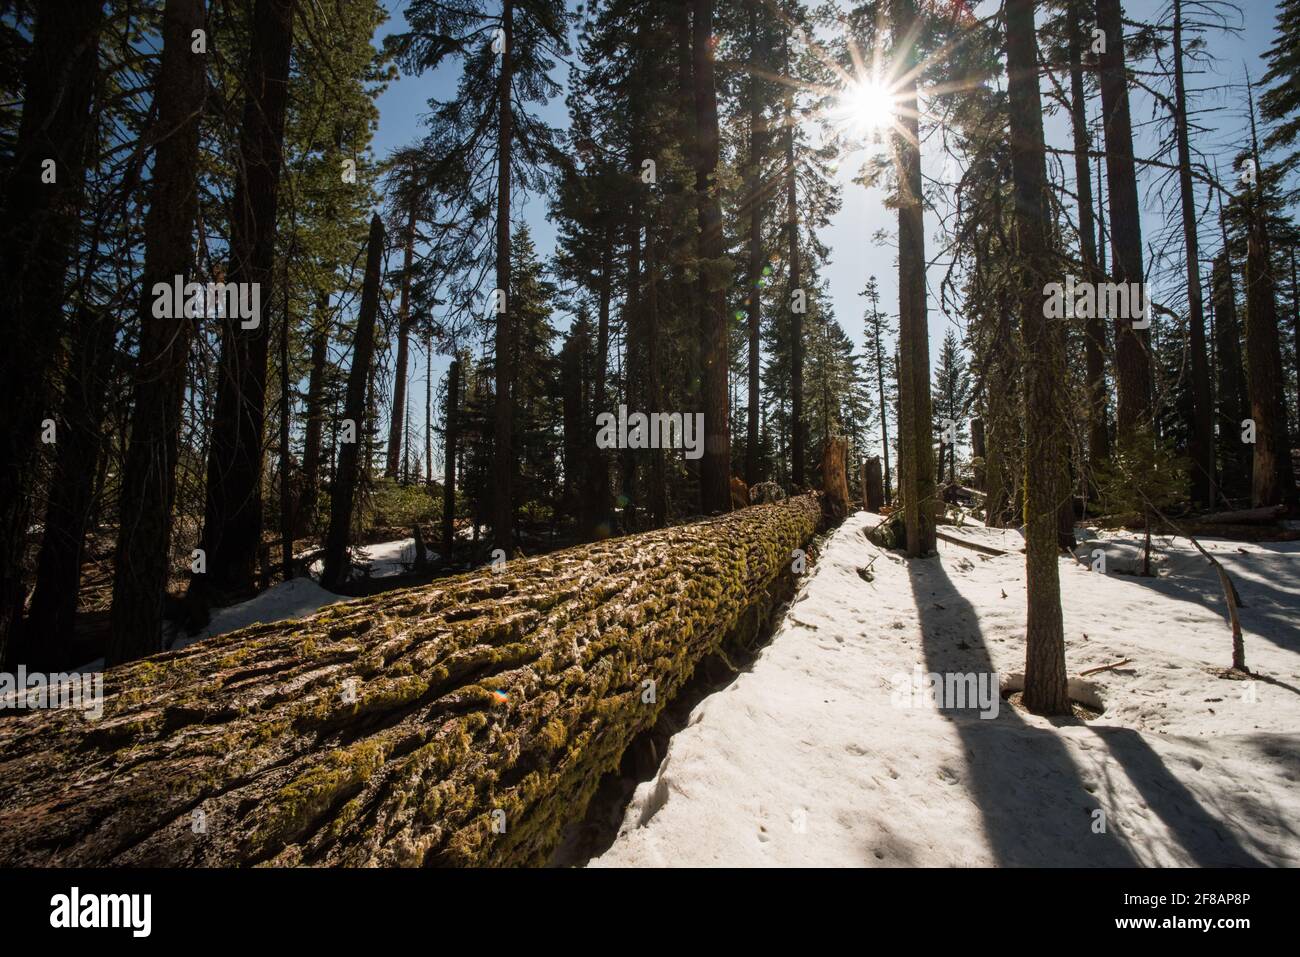 A fallen tree in the forest of Yosemite National park, California. The sun shines through the trees onto the snow covered ground. Stock Photo